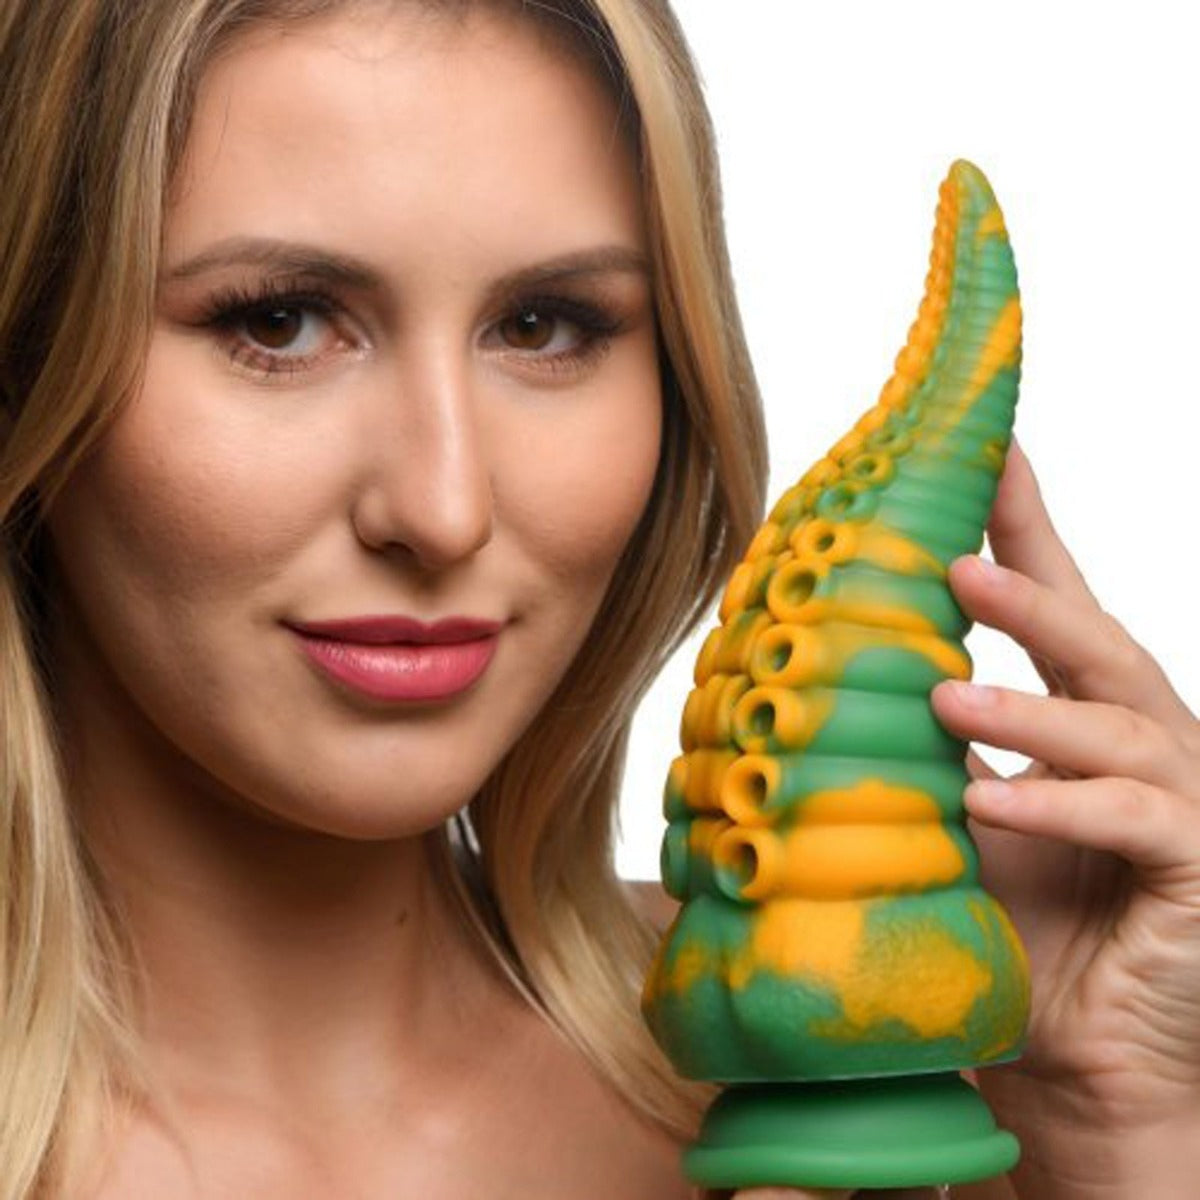 Creature Cocks Monstropus Tentacled Monster Silicone Dildo Yellow Green - Simply Pleasure